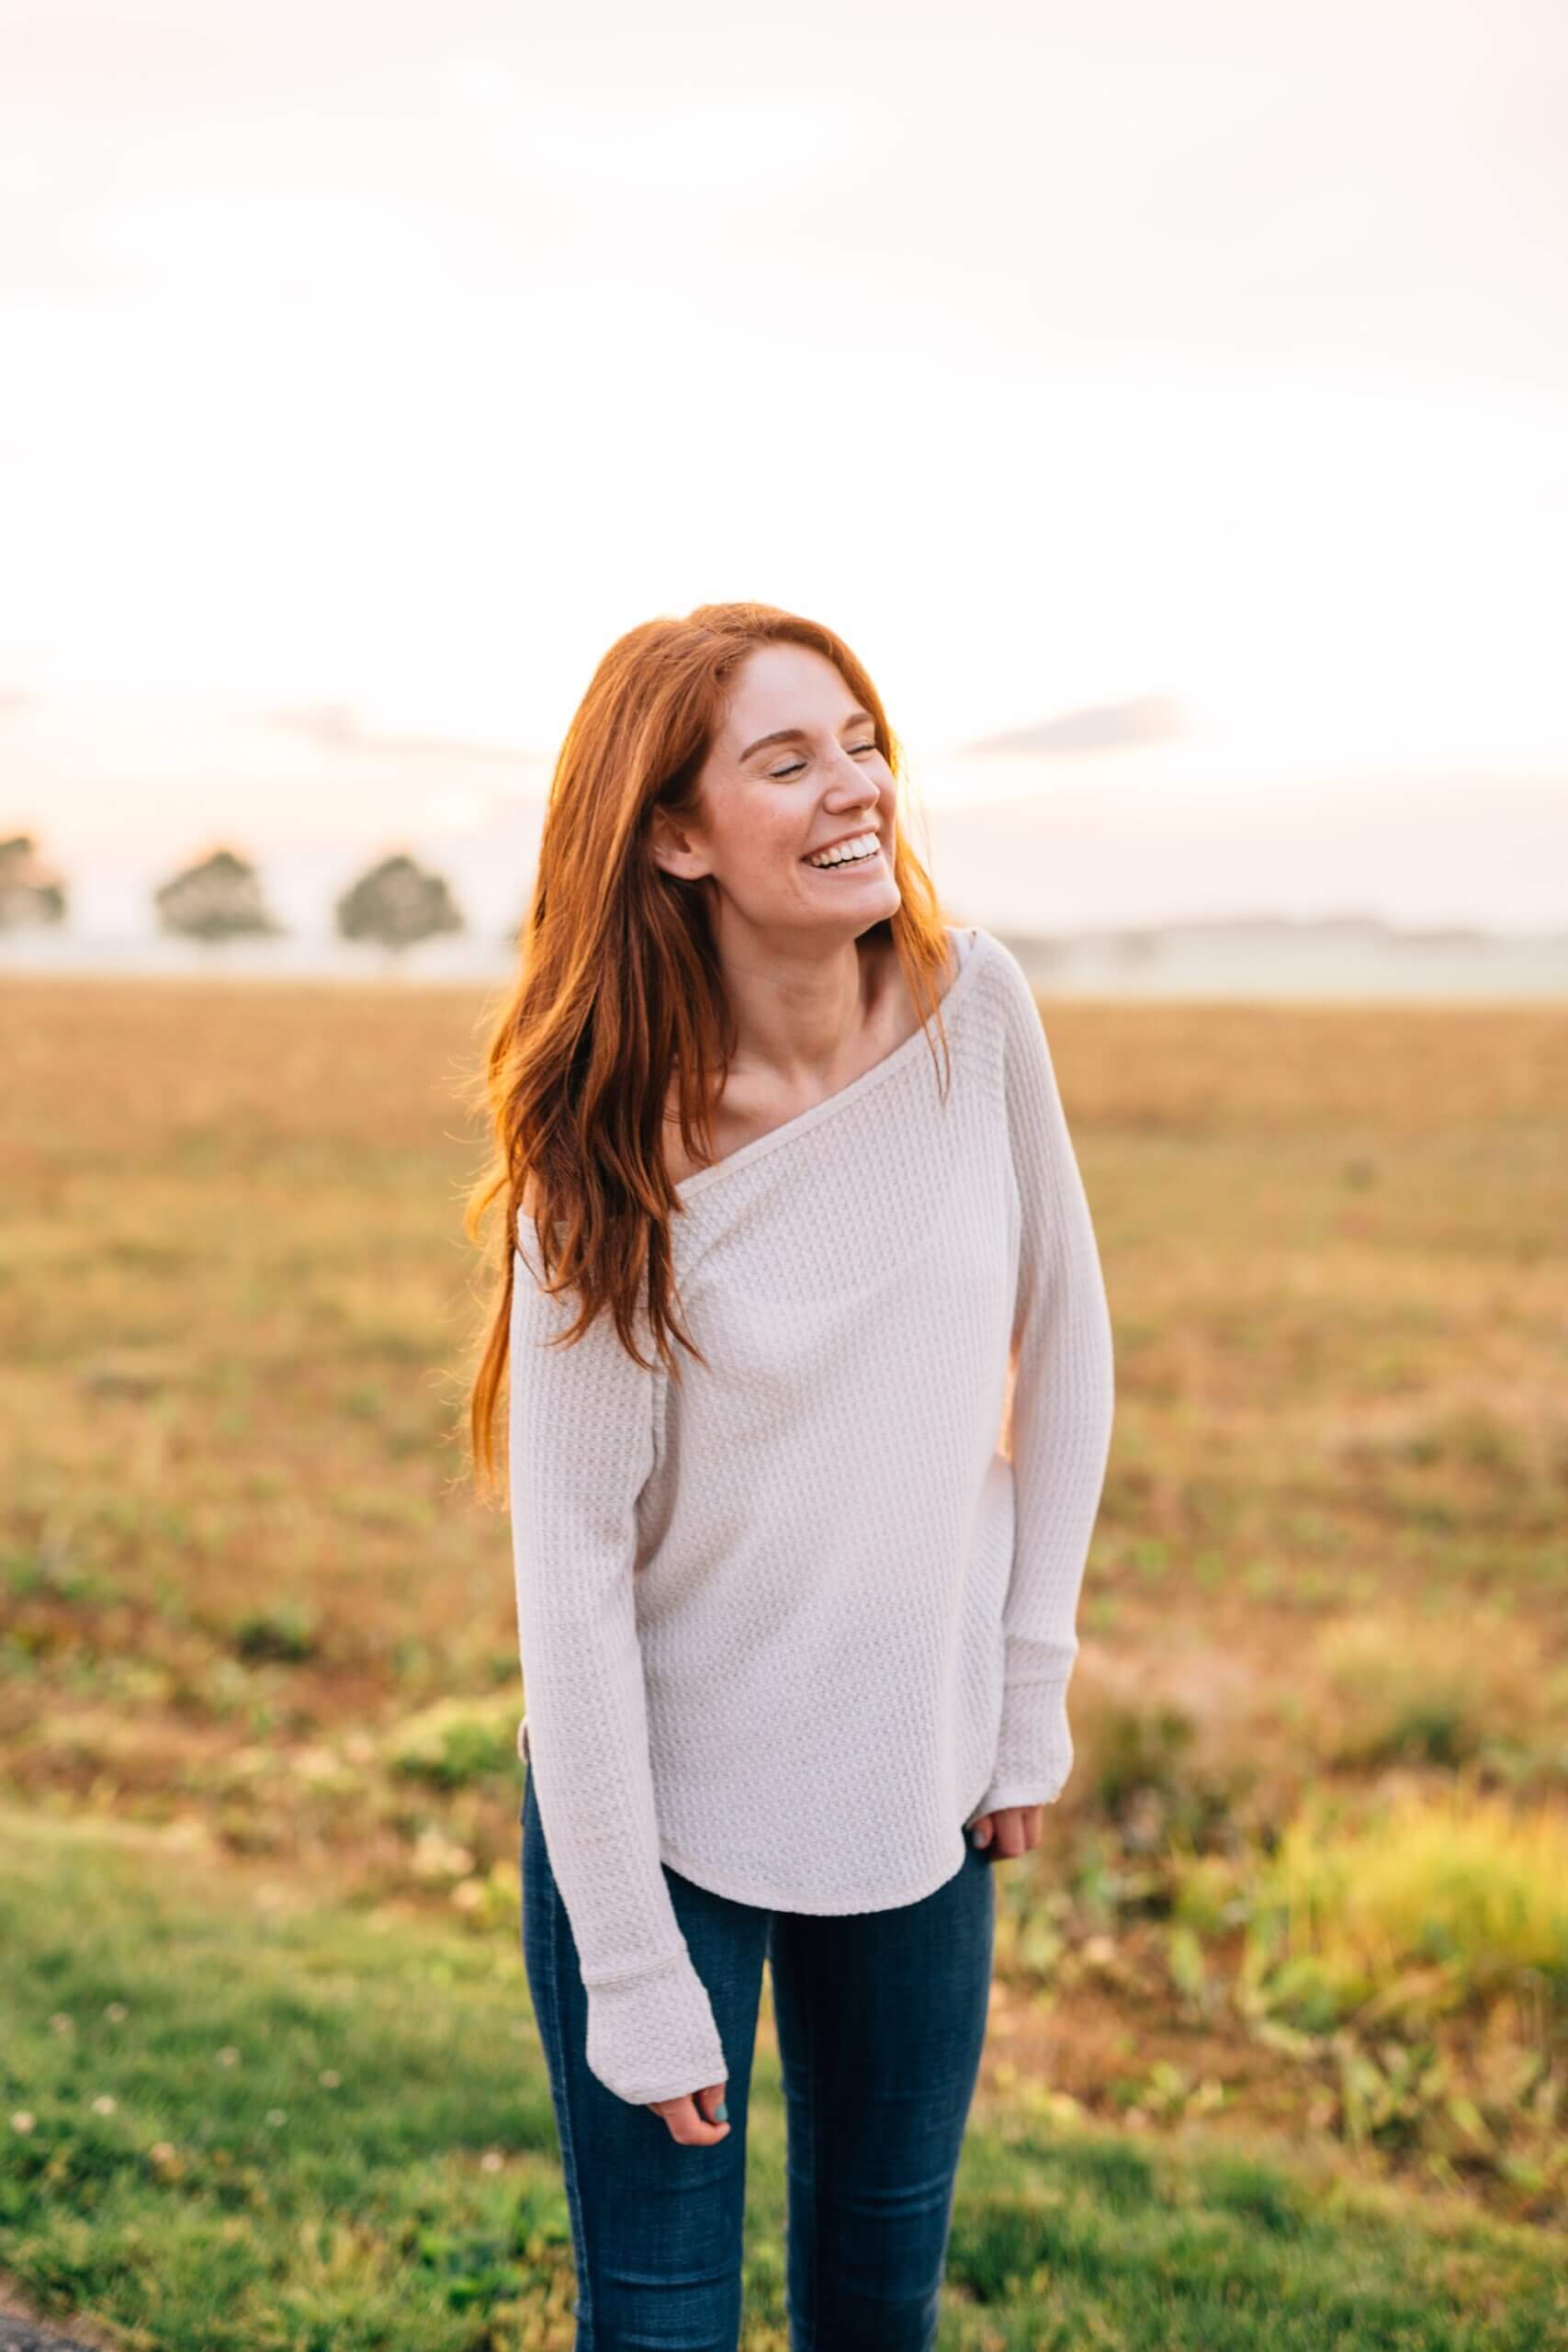 woman smiling in field with red hair